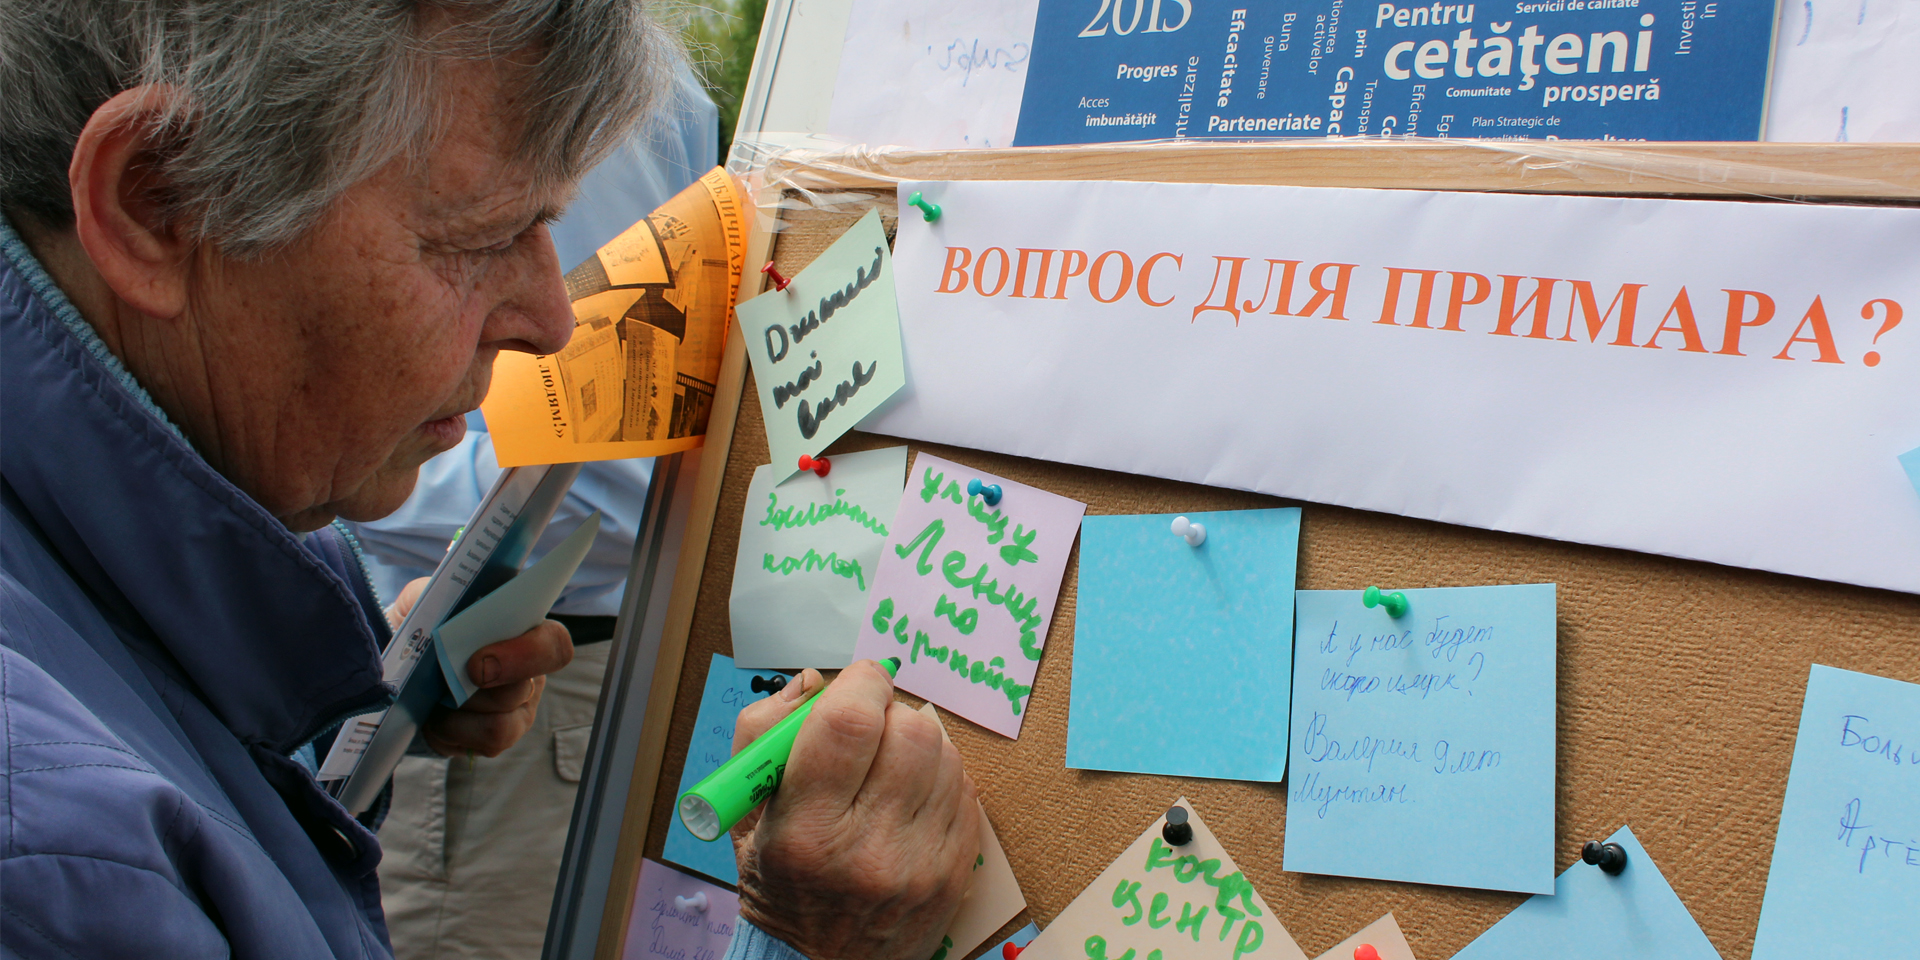 A man outside writing on a sticky note pinned to a corkboard.